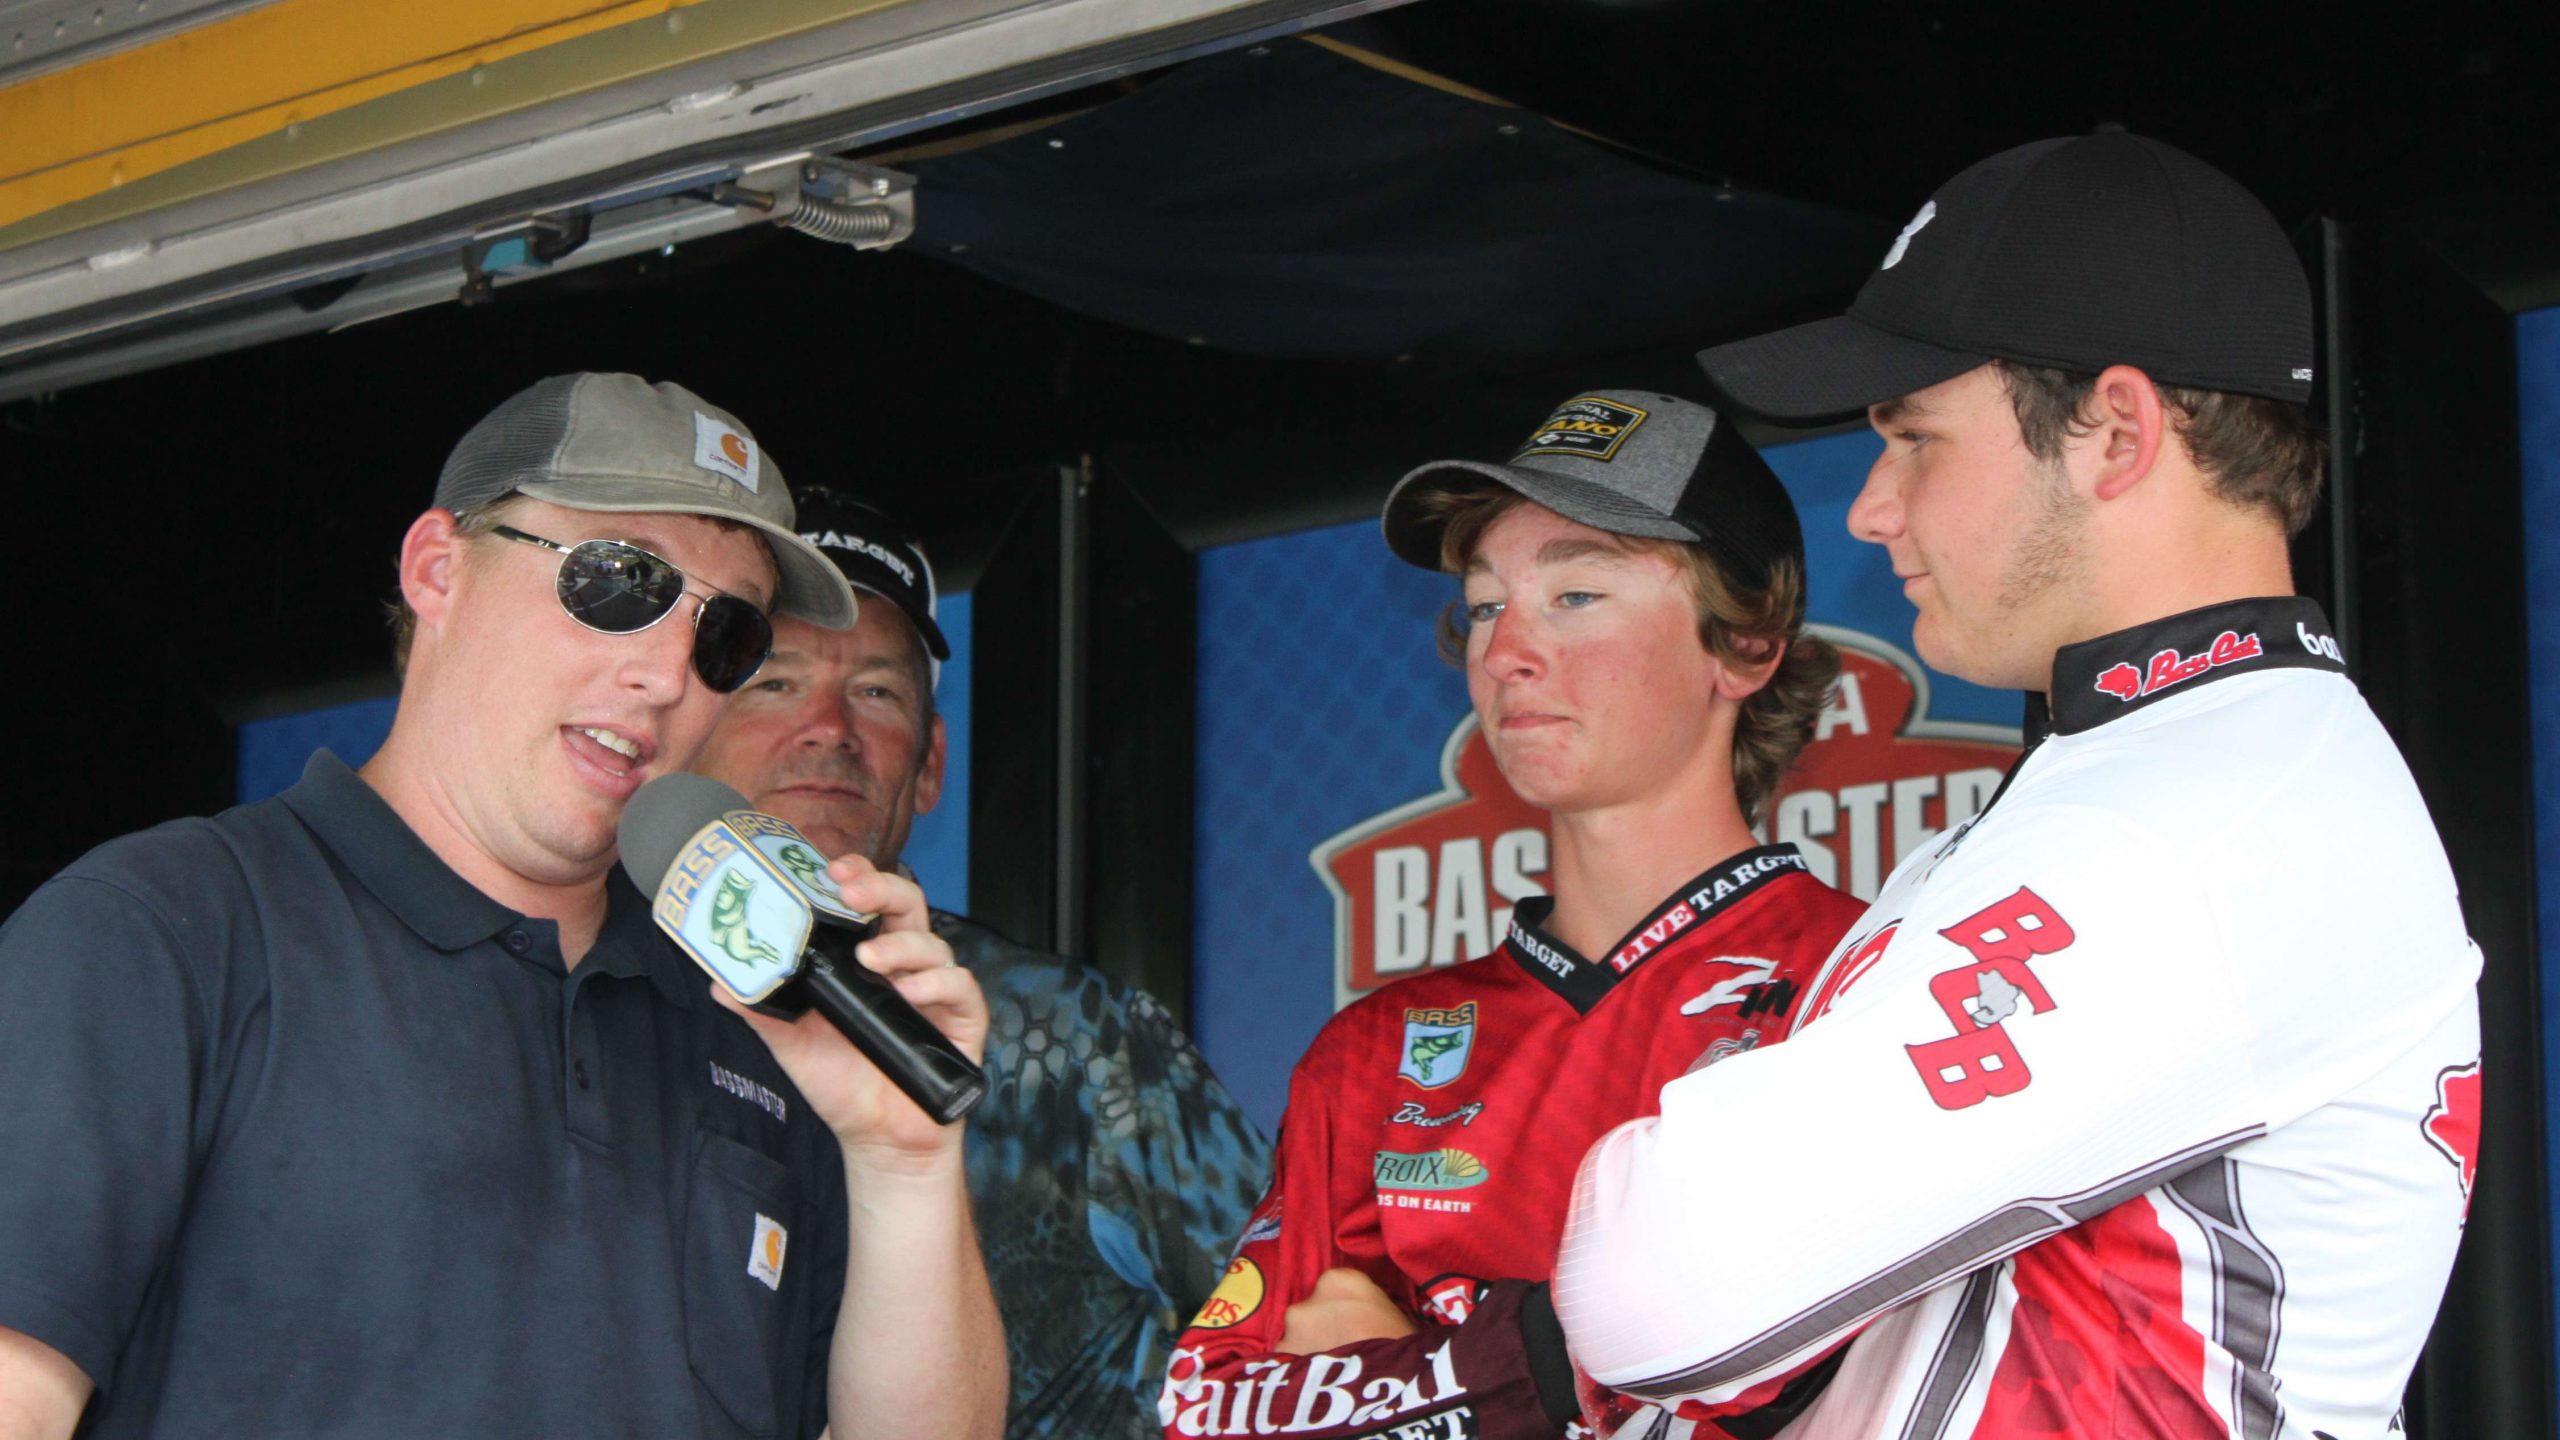 Tournament director Hank Weldon took a few minutes to interview Vereen and Browning after their catch. Bassmaster Elite Series pro Stephen Browning, who is coach for Team Arkansas, beams from behind.